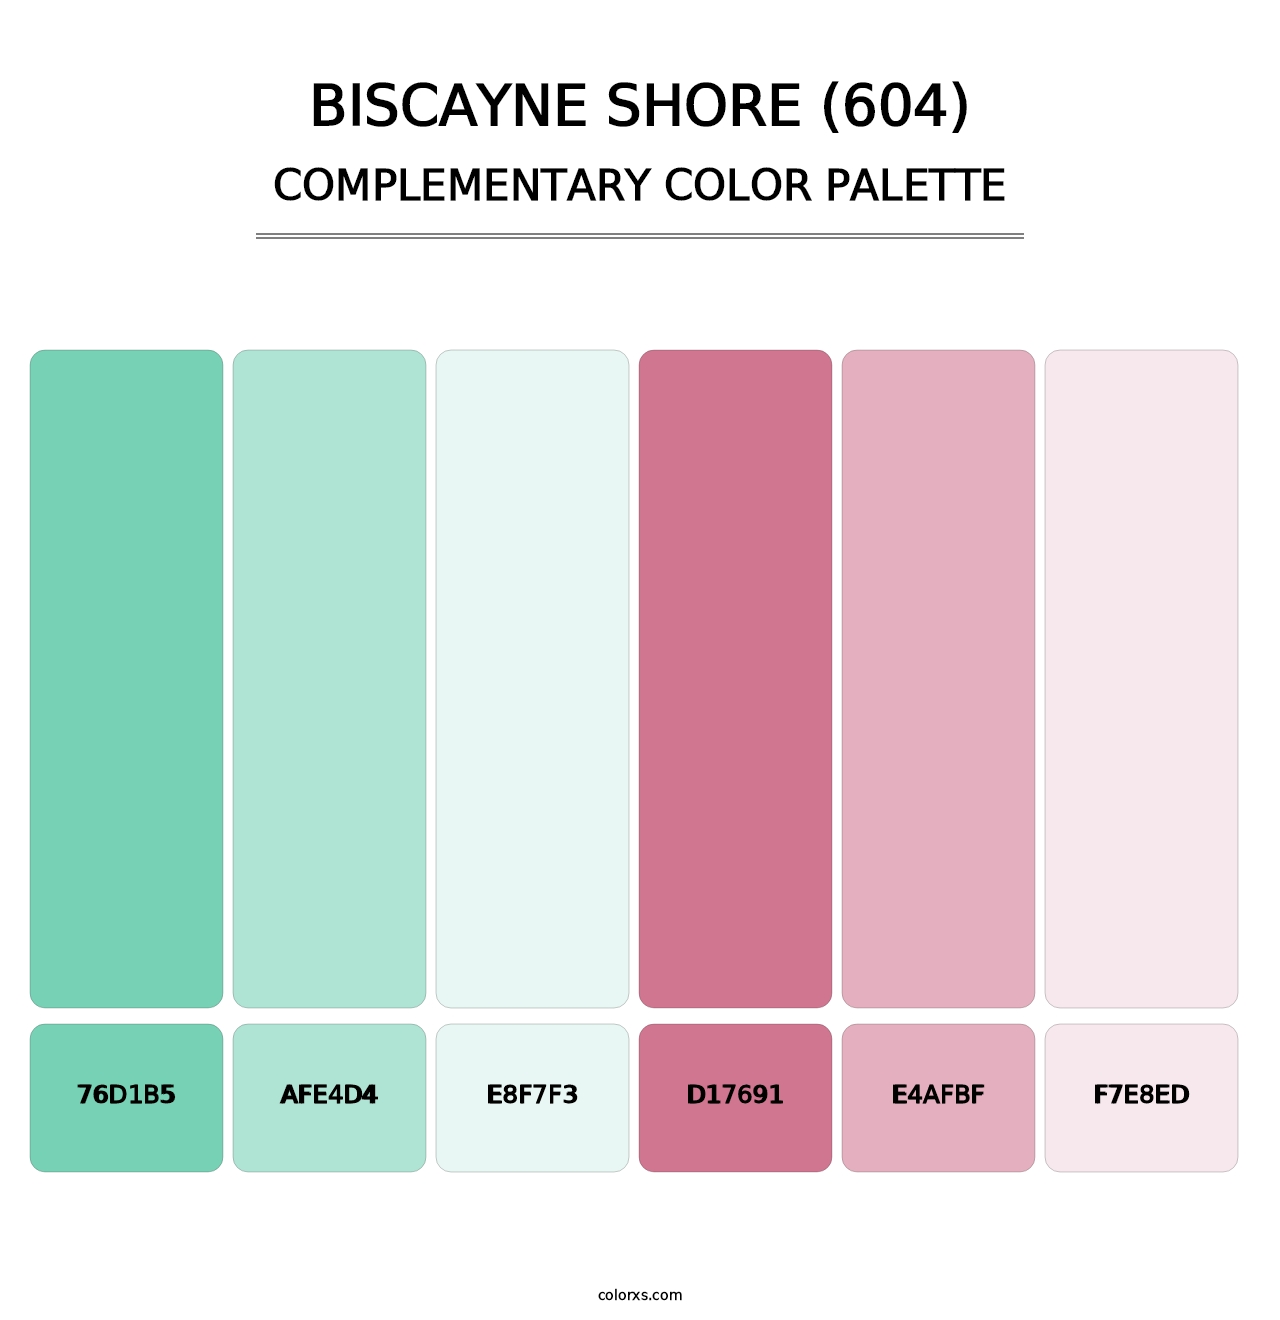 Biscayne Shore (604) - Complementary Color Palette